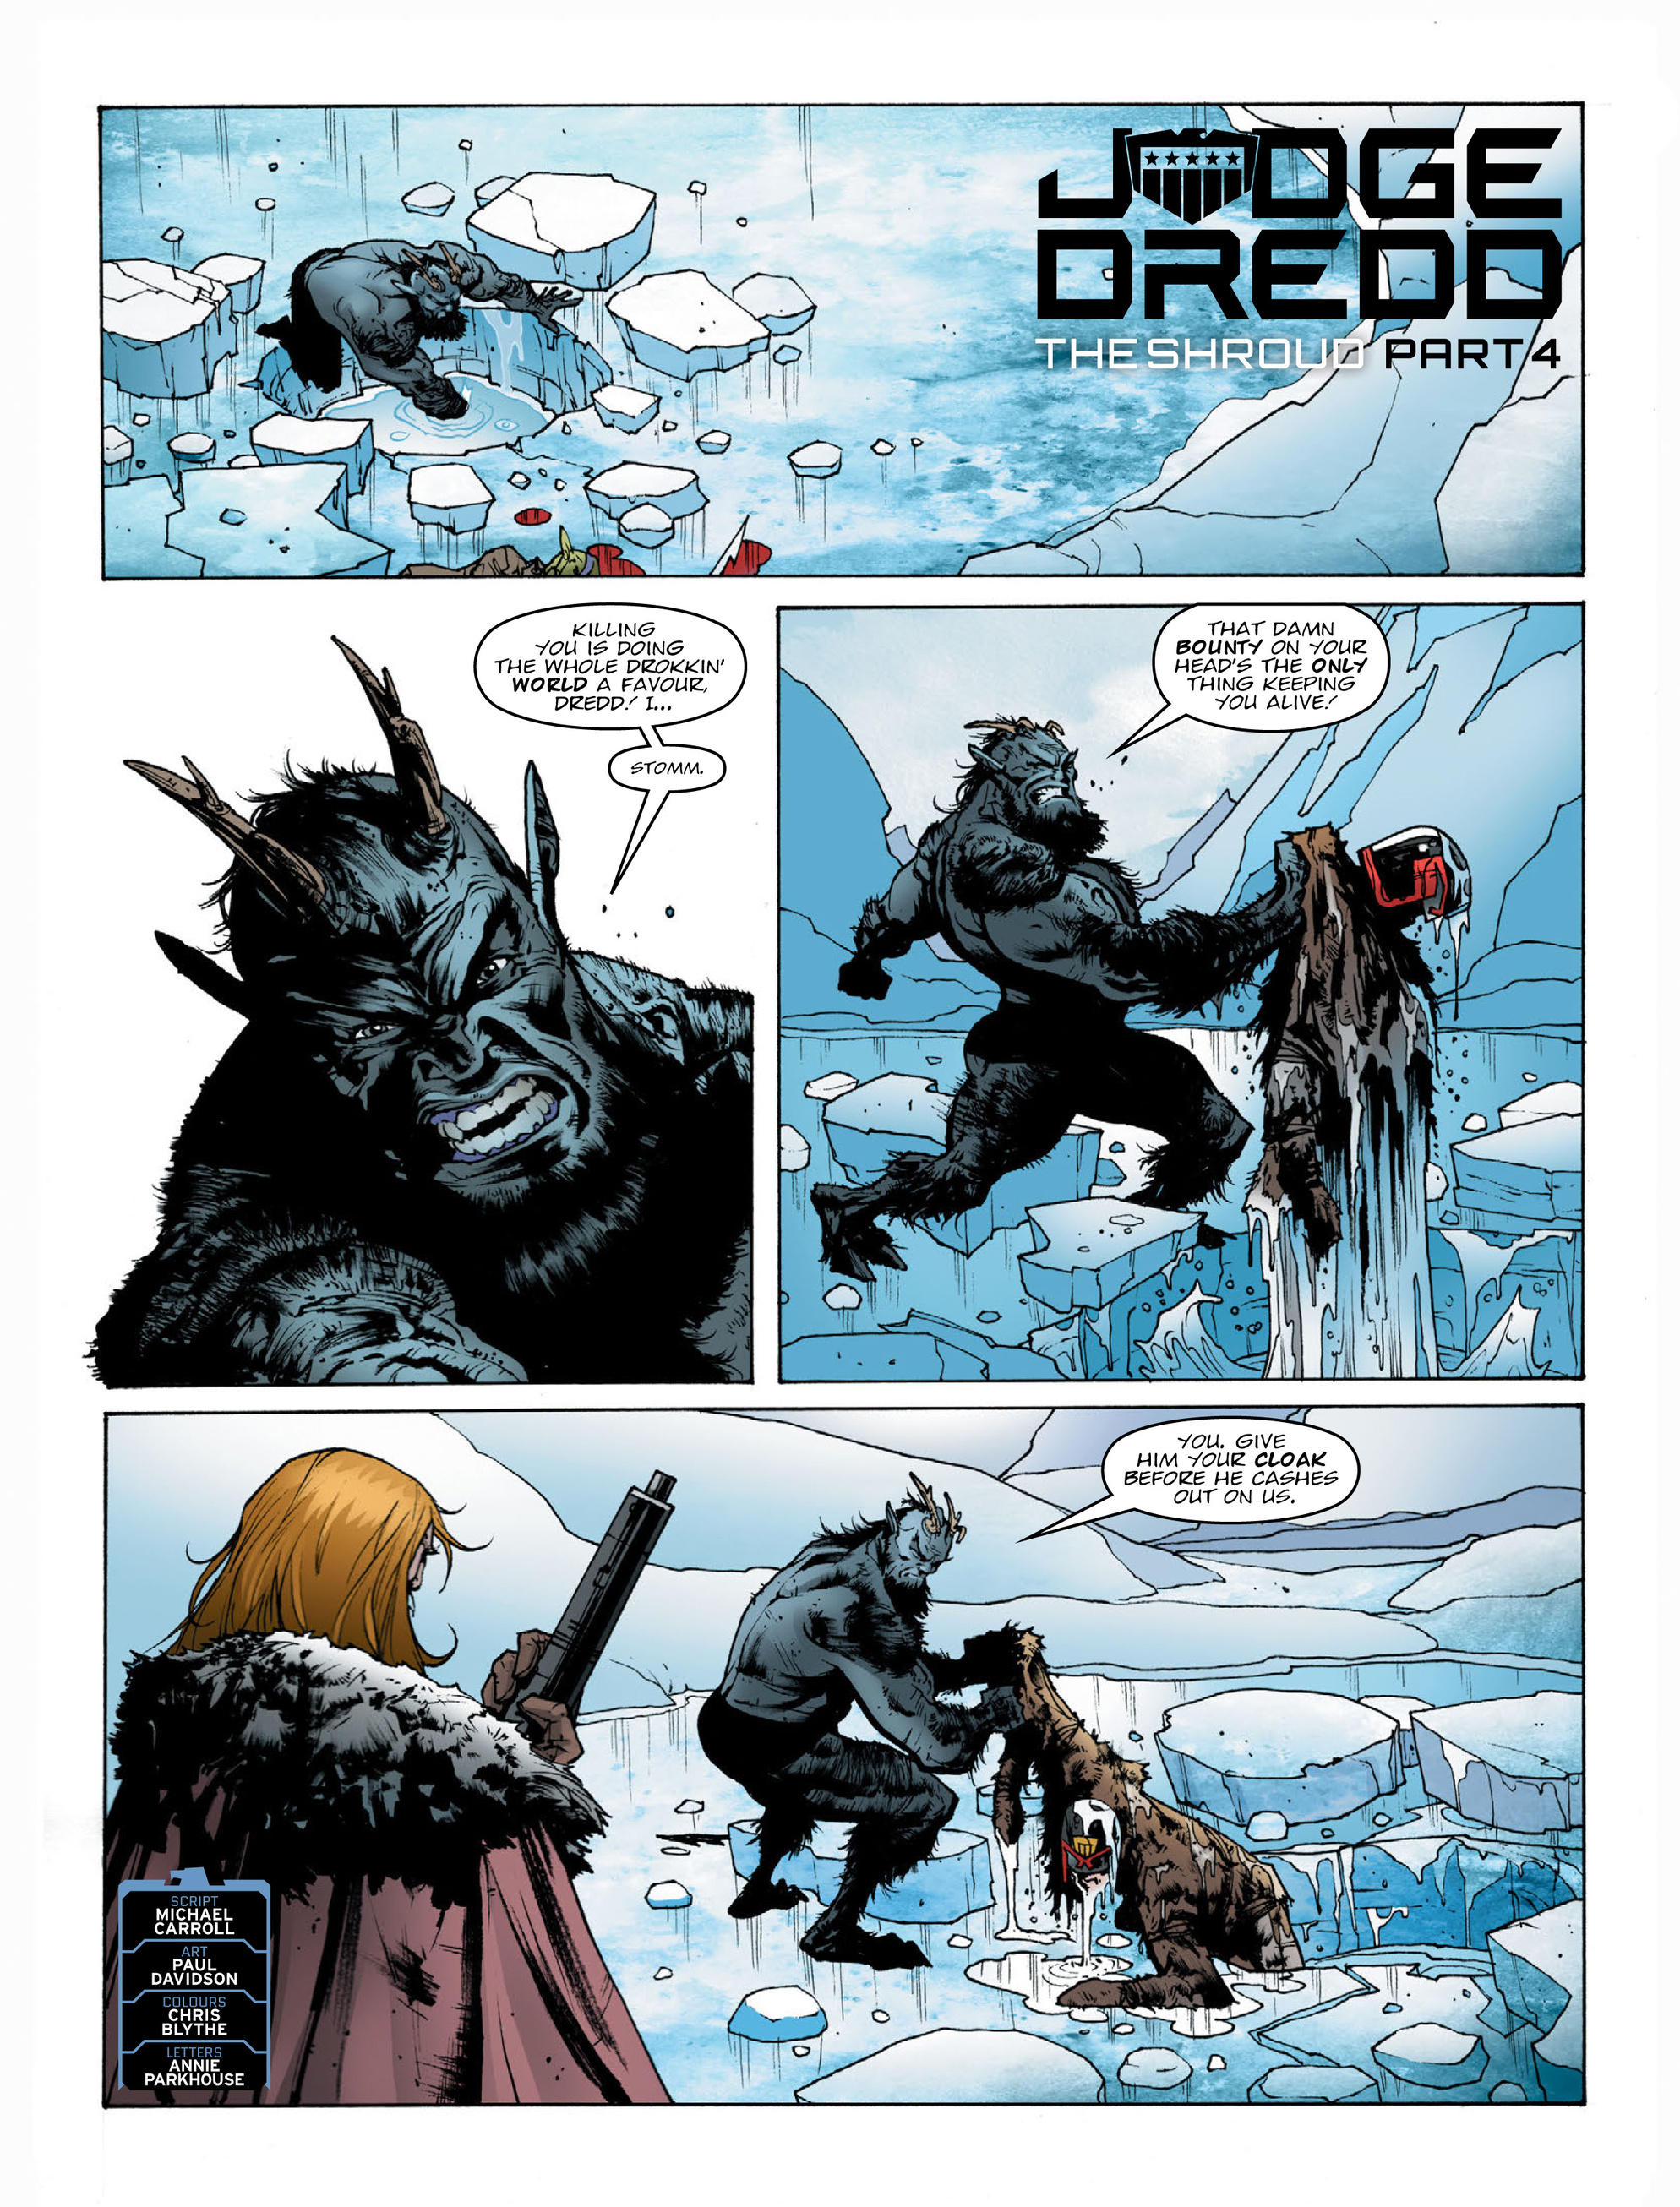 2000 AD: Chapter 2068 - Page 3